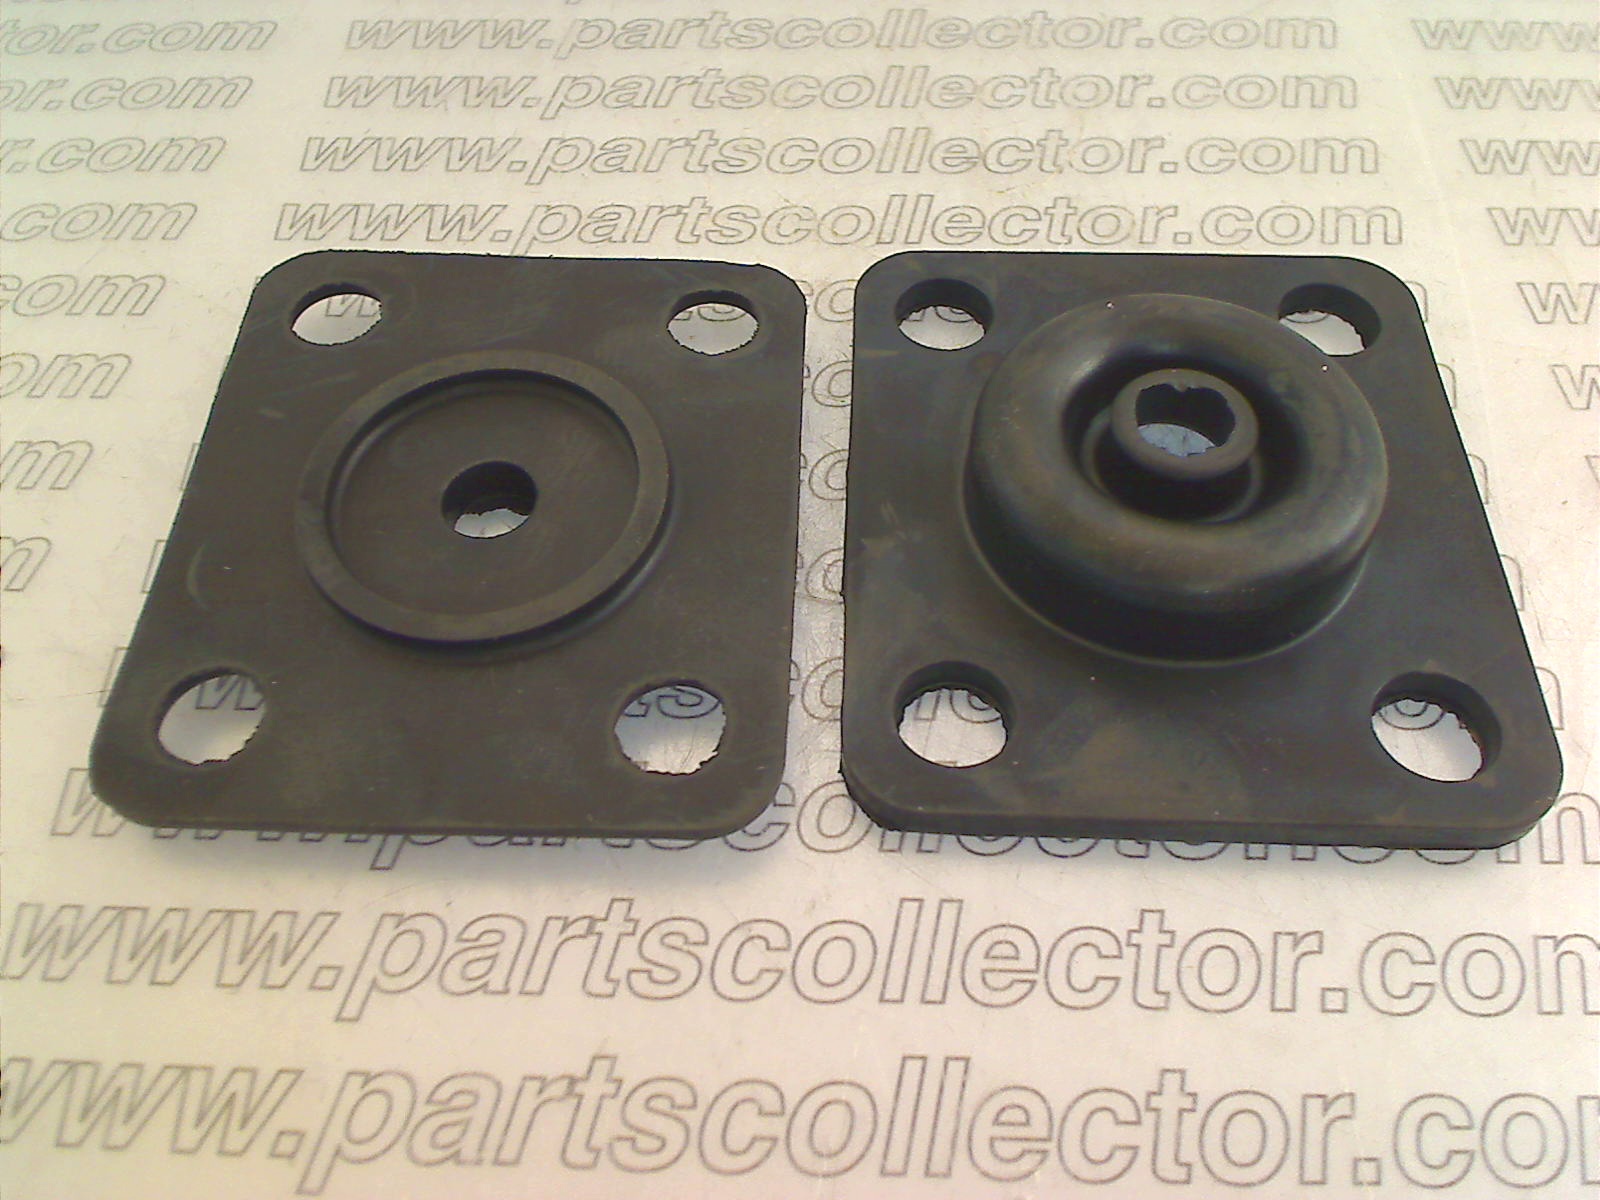 THROTTLE PEDAL DUST RUBBER COVER